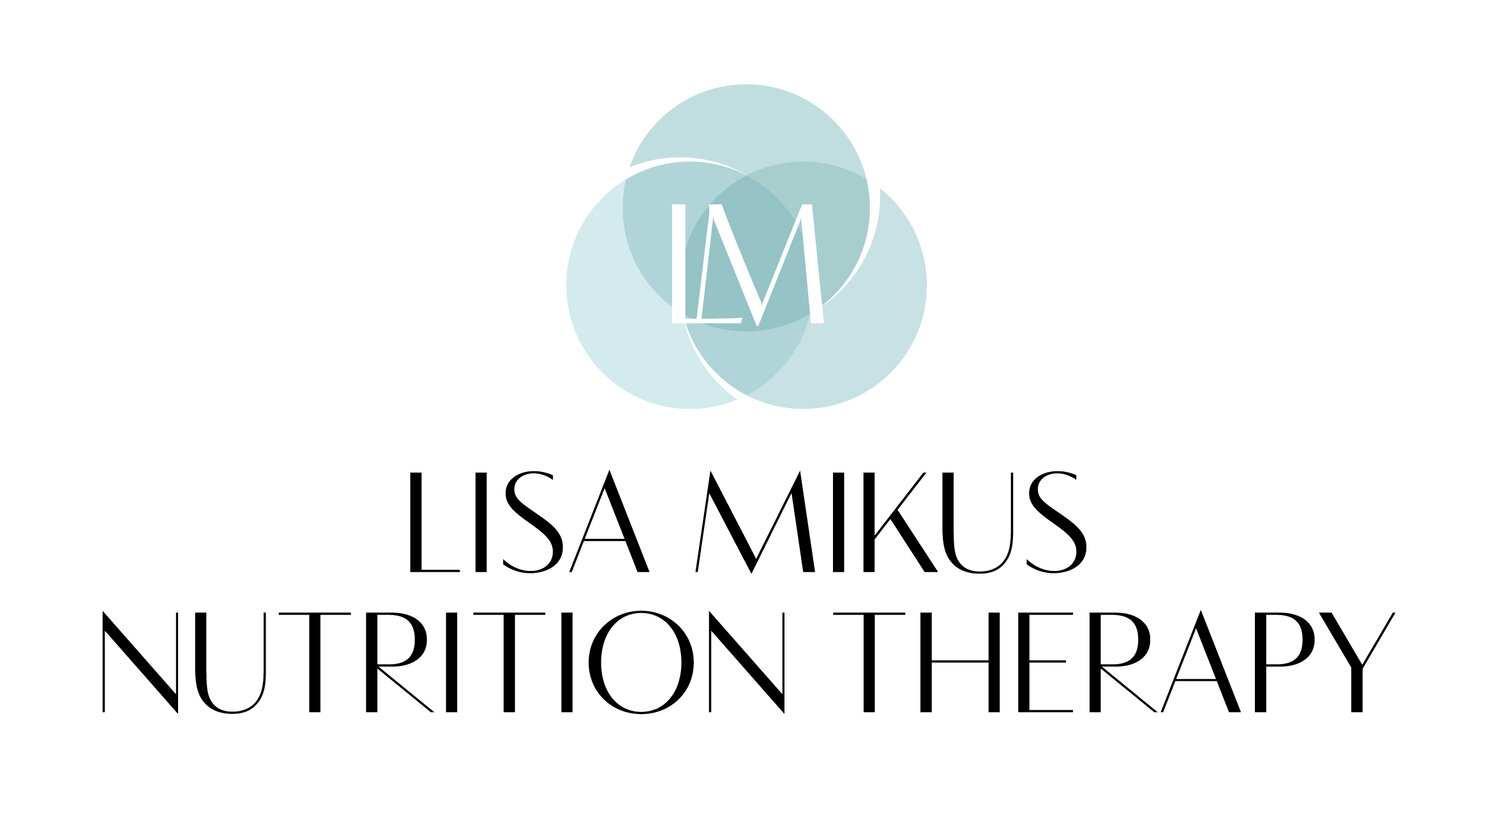 Lisa Mikus Nutrition Therapy